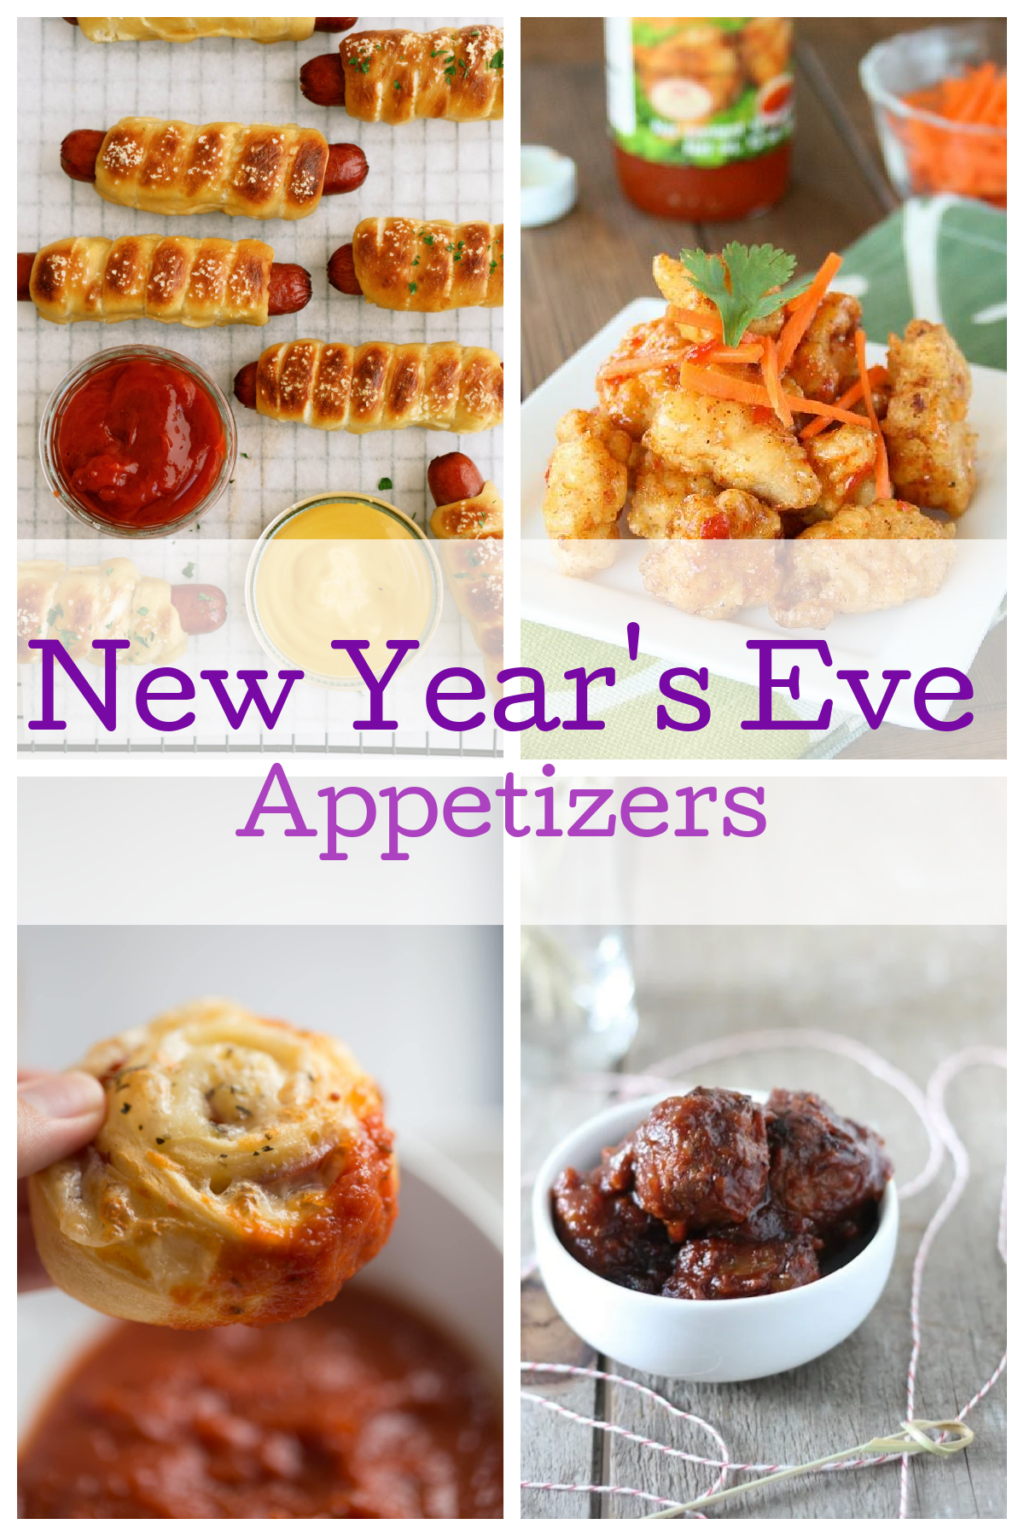 New Year's Eve Appetizers - Lauren's Latest